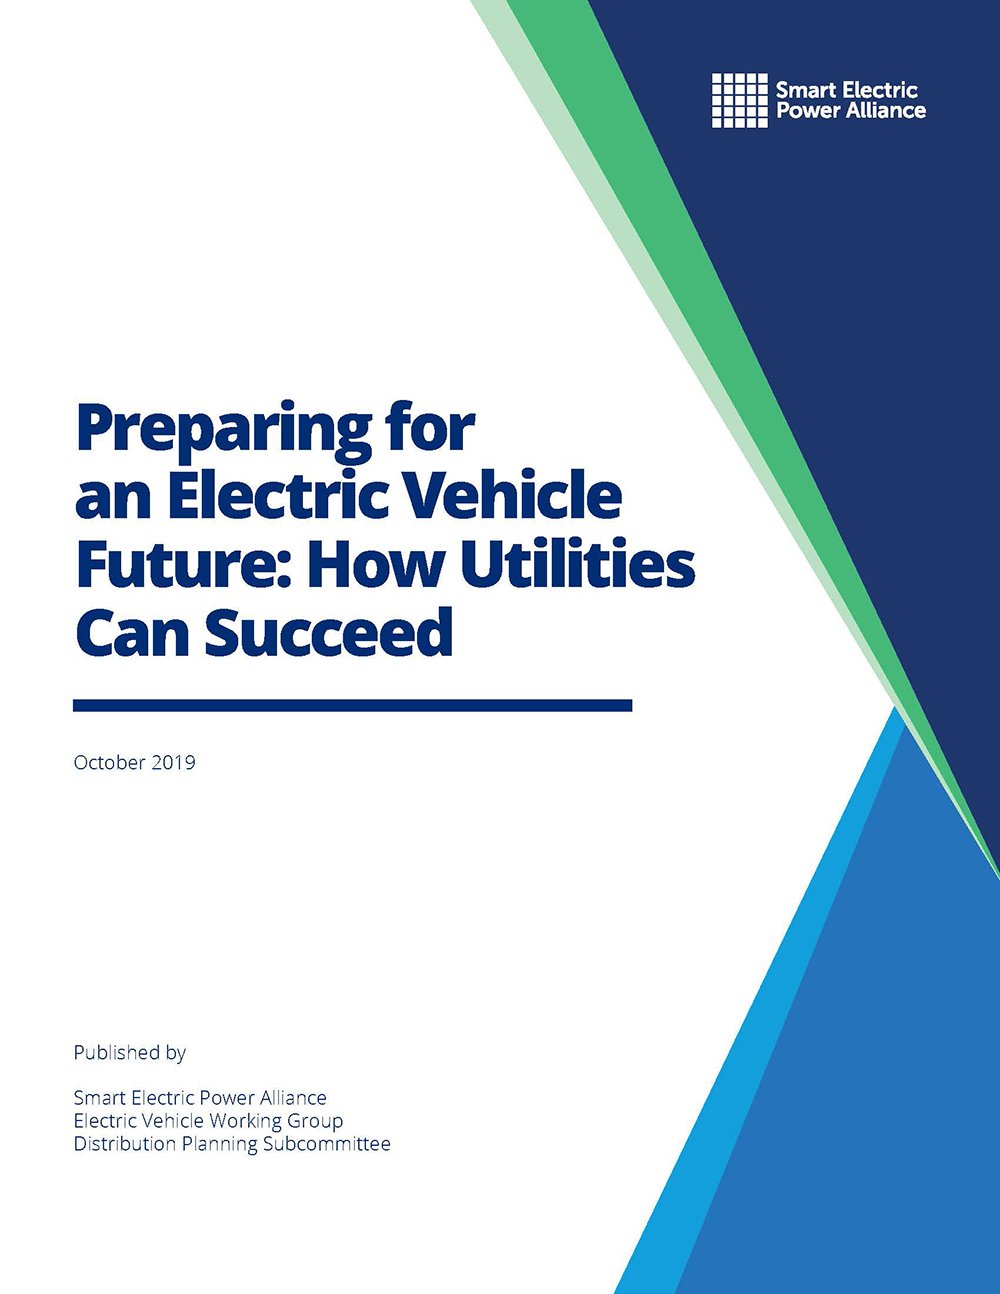 Preparing for an Electric Vehicle Future: How Utilities Can Succeed